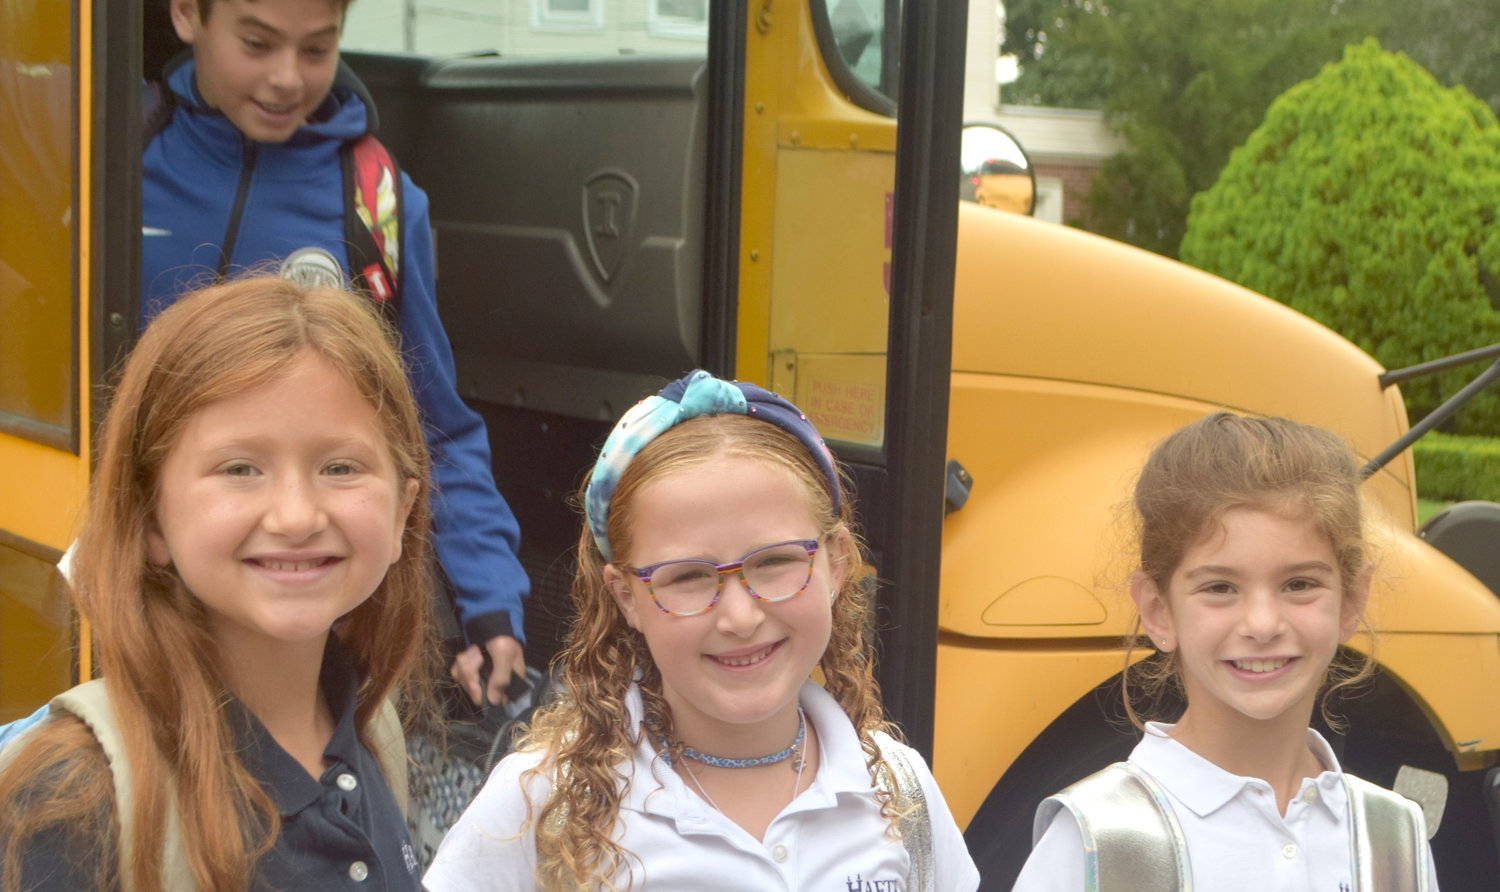 HAFTR third-graders Michelle Hersh, 8, Juliet Weinrib, 7 and Grace Rosenberg, 8, are all smiles as they left their bus on the first day of school.